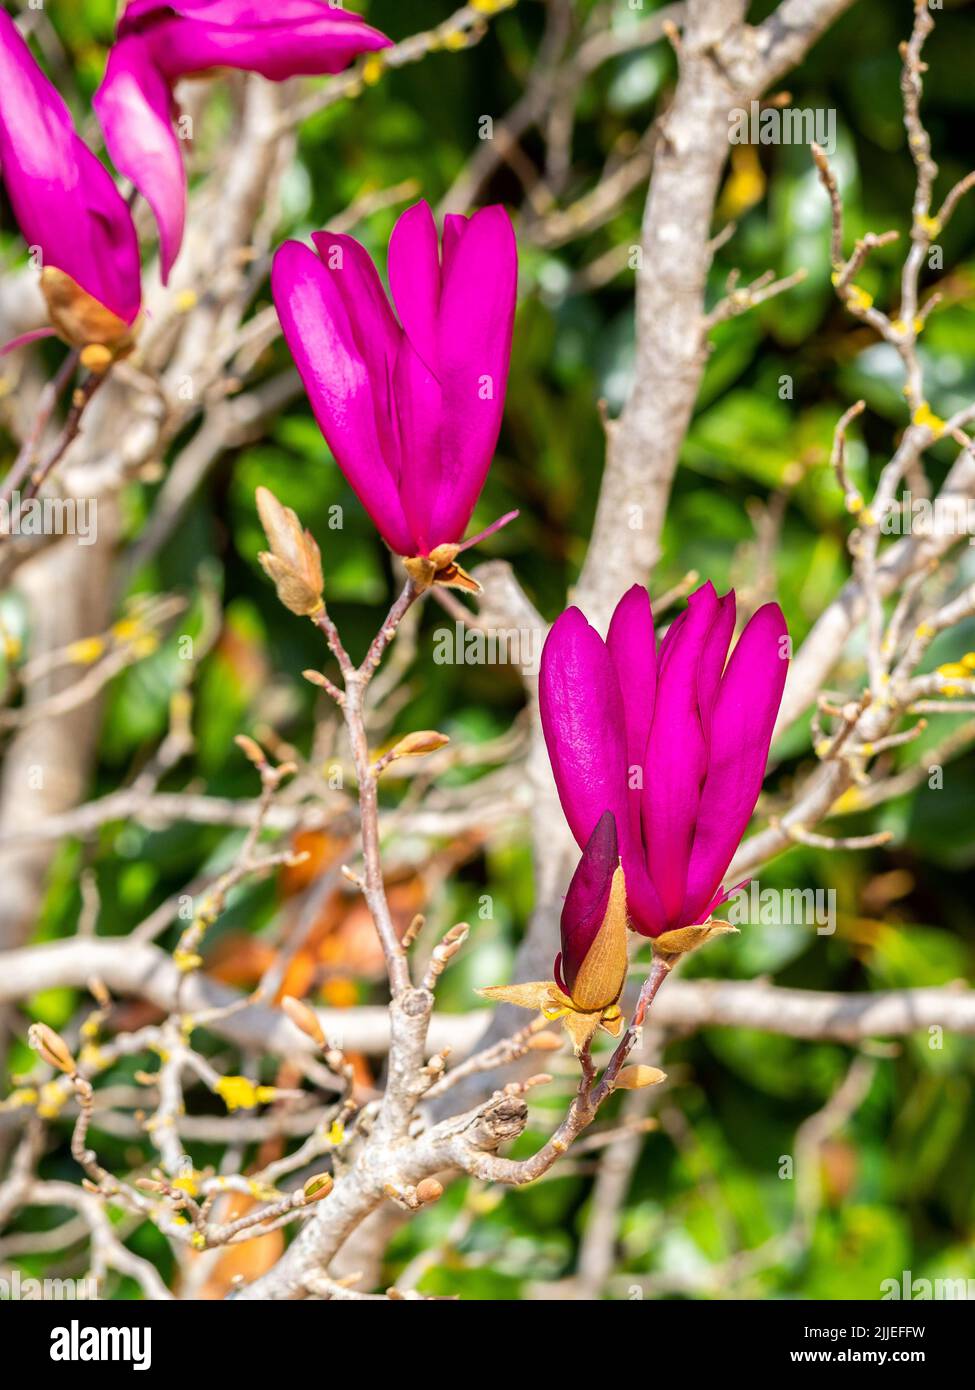 selective focus of Magnolia Soulangeana Susan flowers in a garden with blurred background Stock Photo